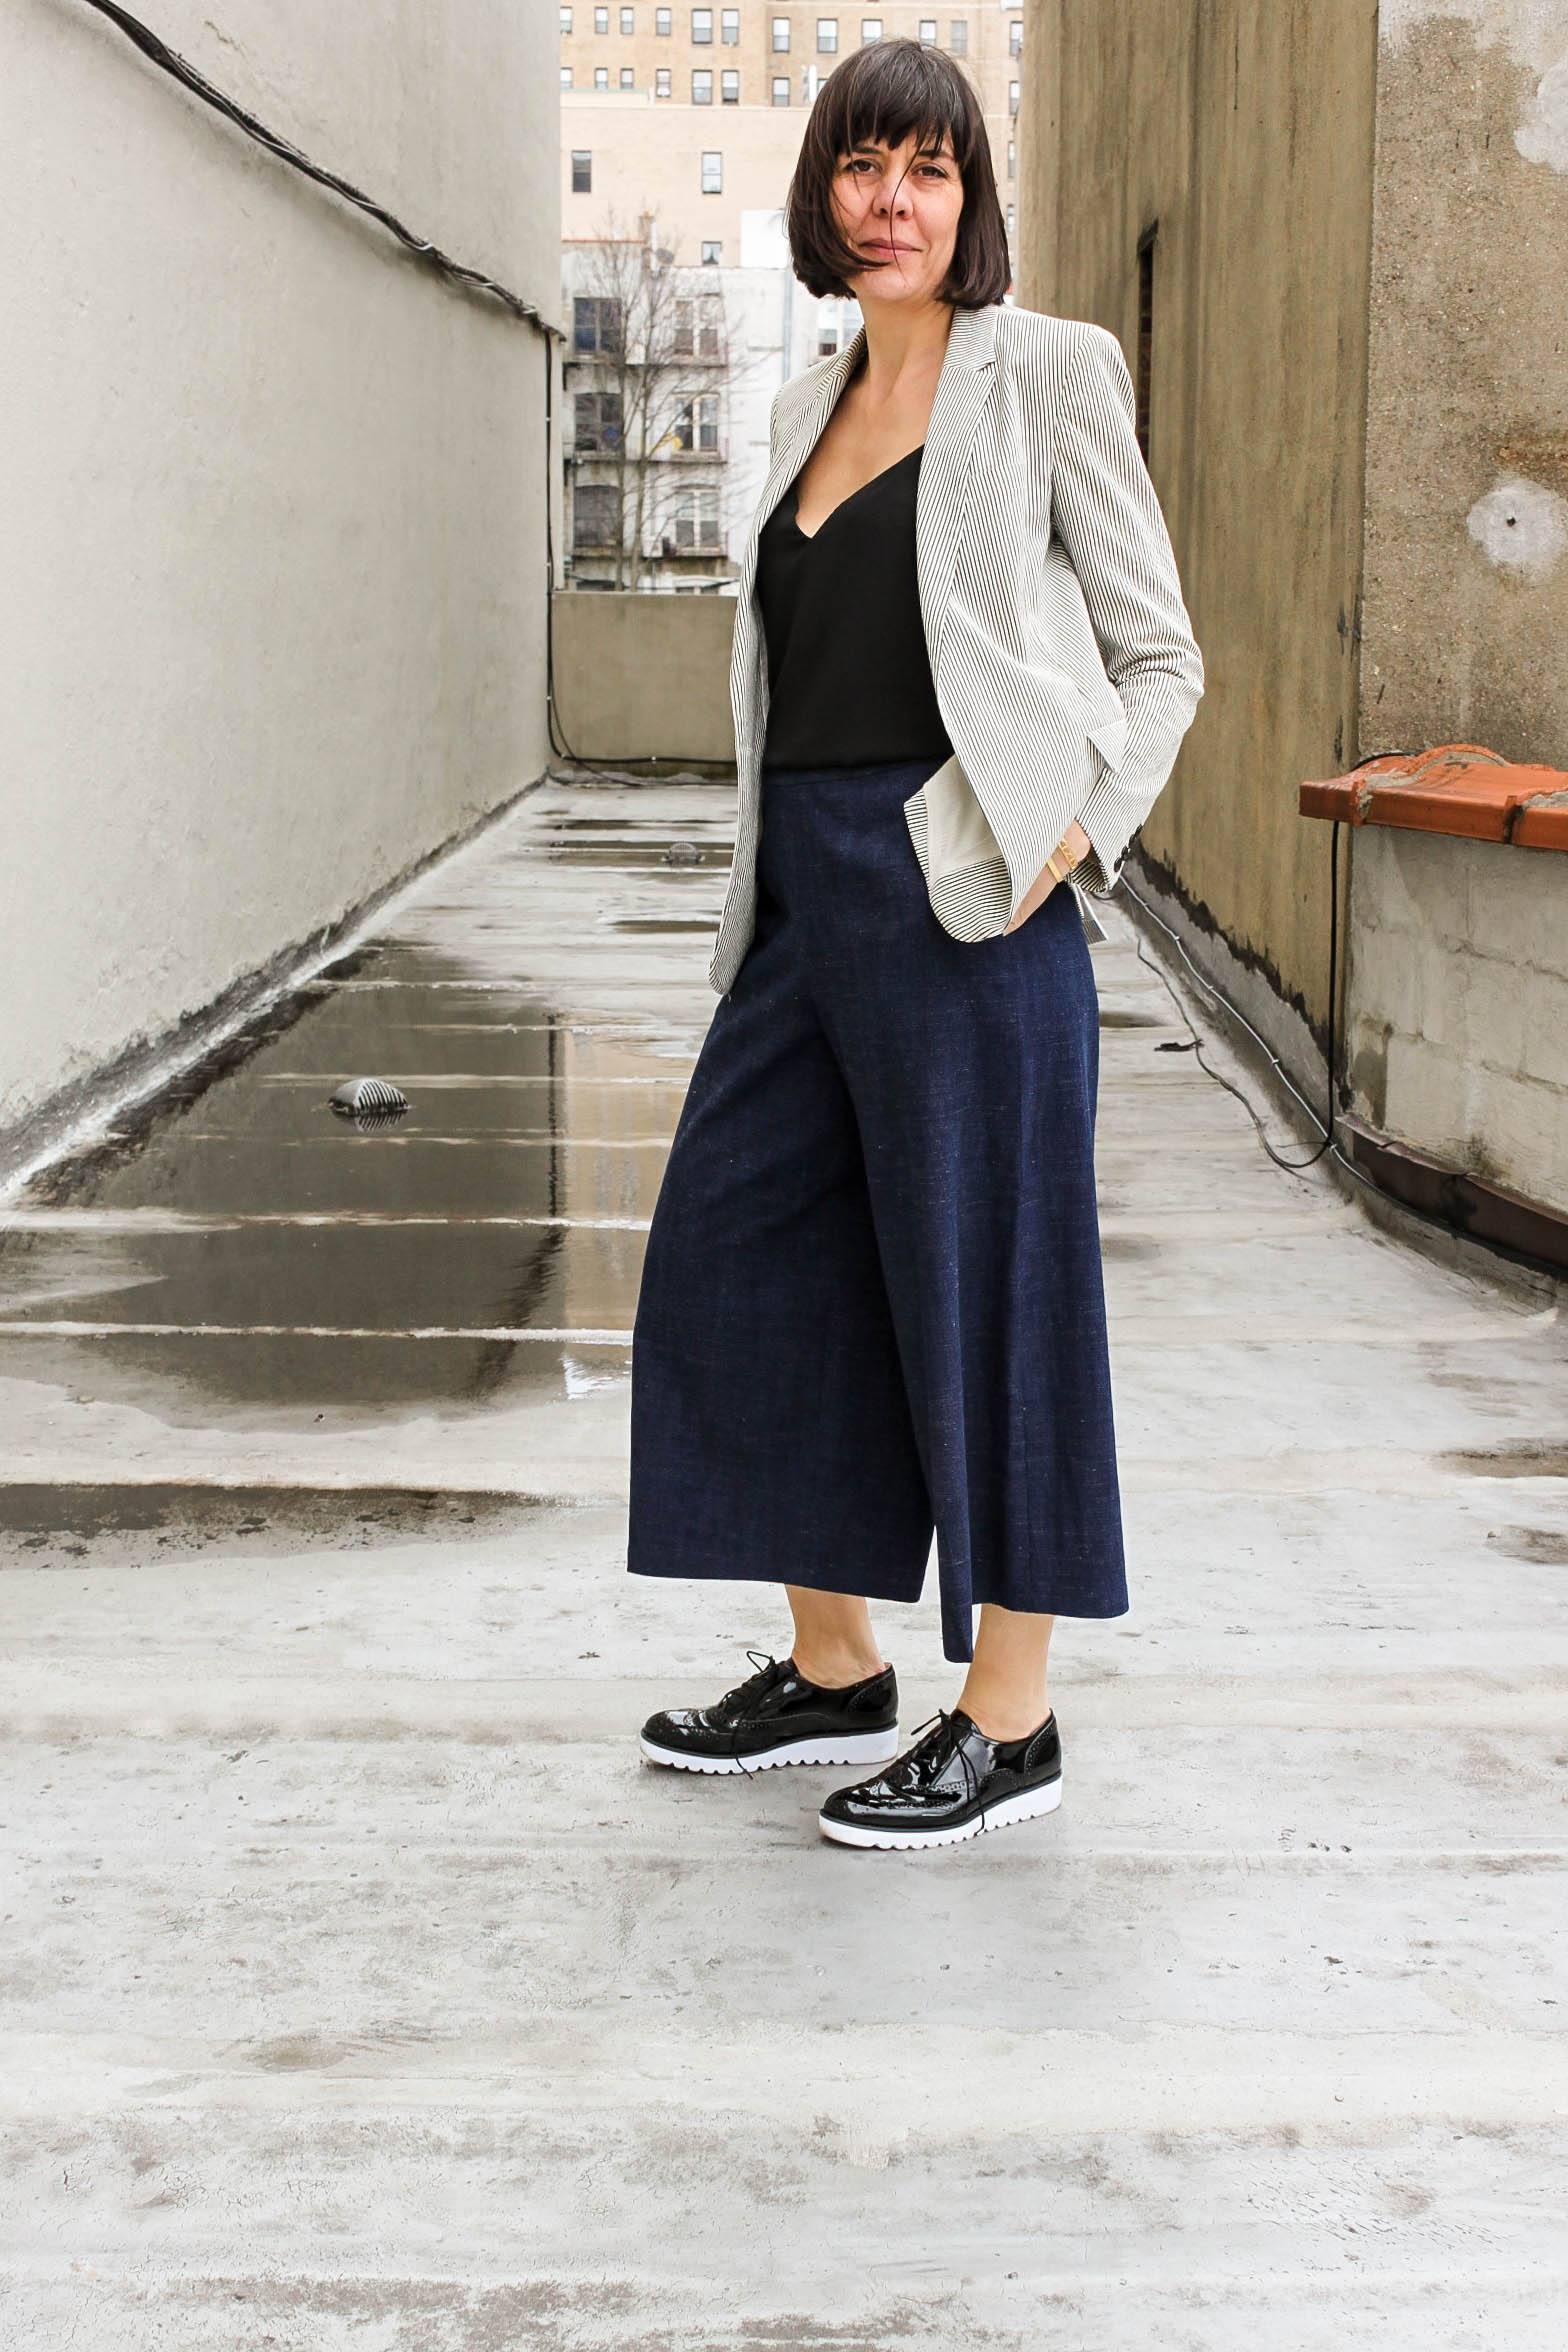 Winter culottes stylin' — Noble & Daughter